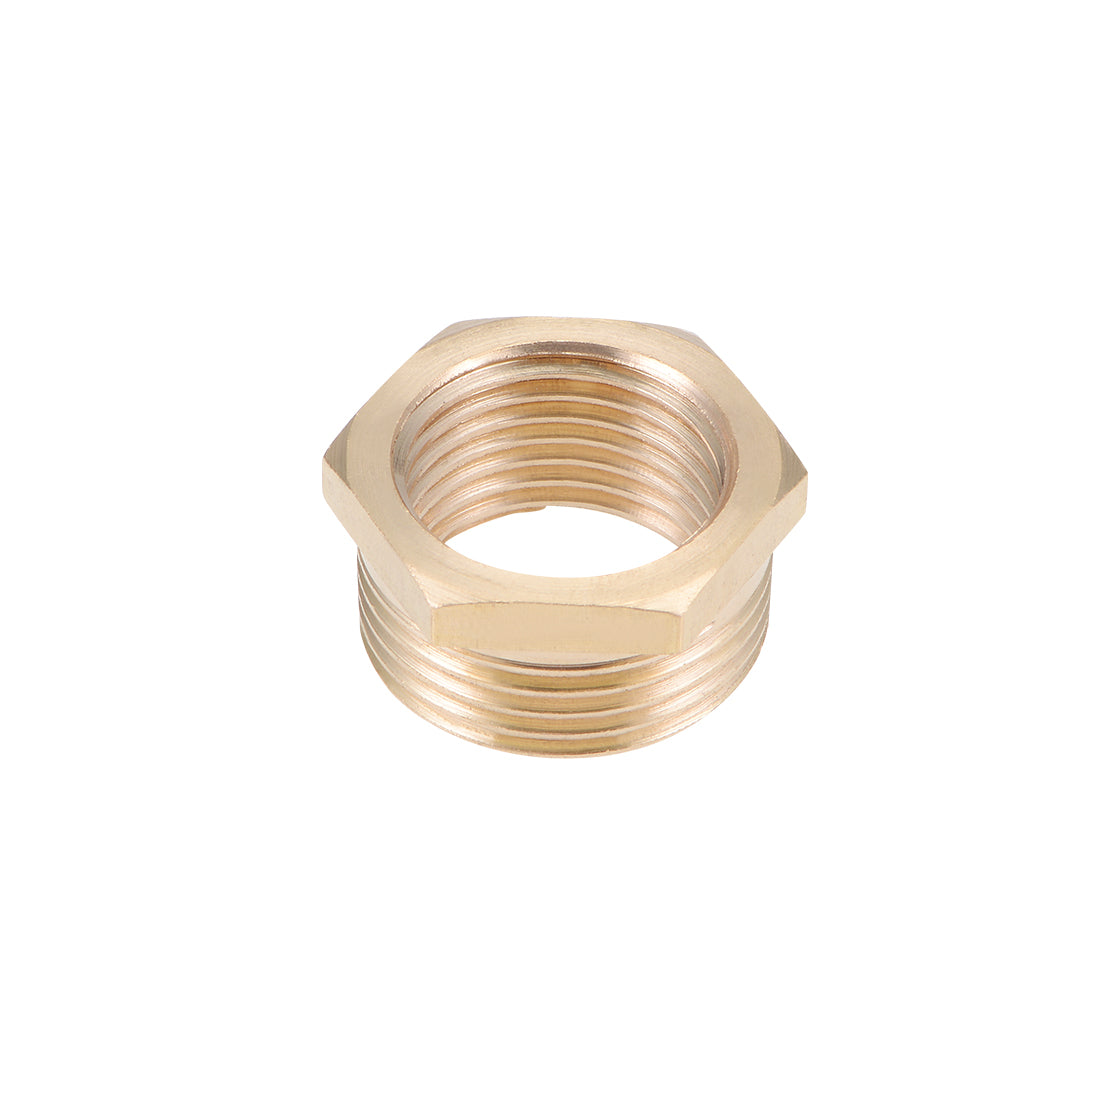 uxcell Uxcell Brass Threaded Pipe Fitting G3/4 Male x G1/2 Female Hex Bushing Adapter Connector 5Pcs